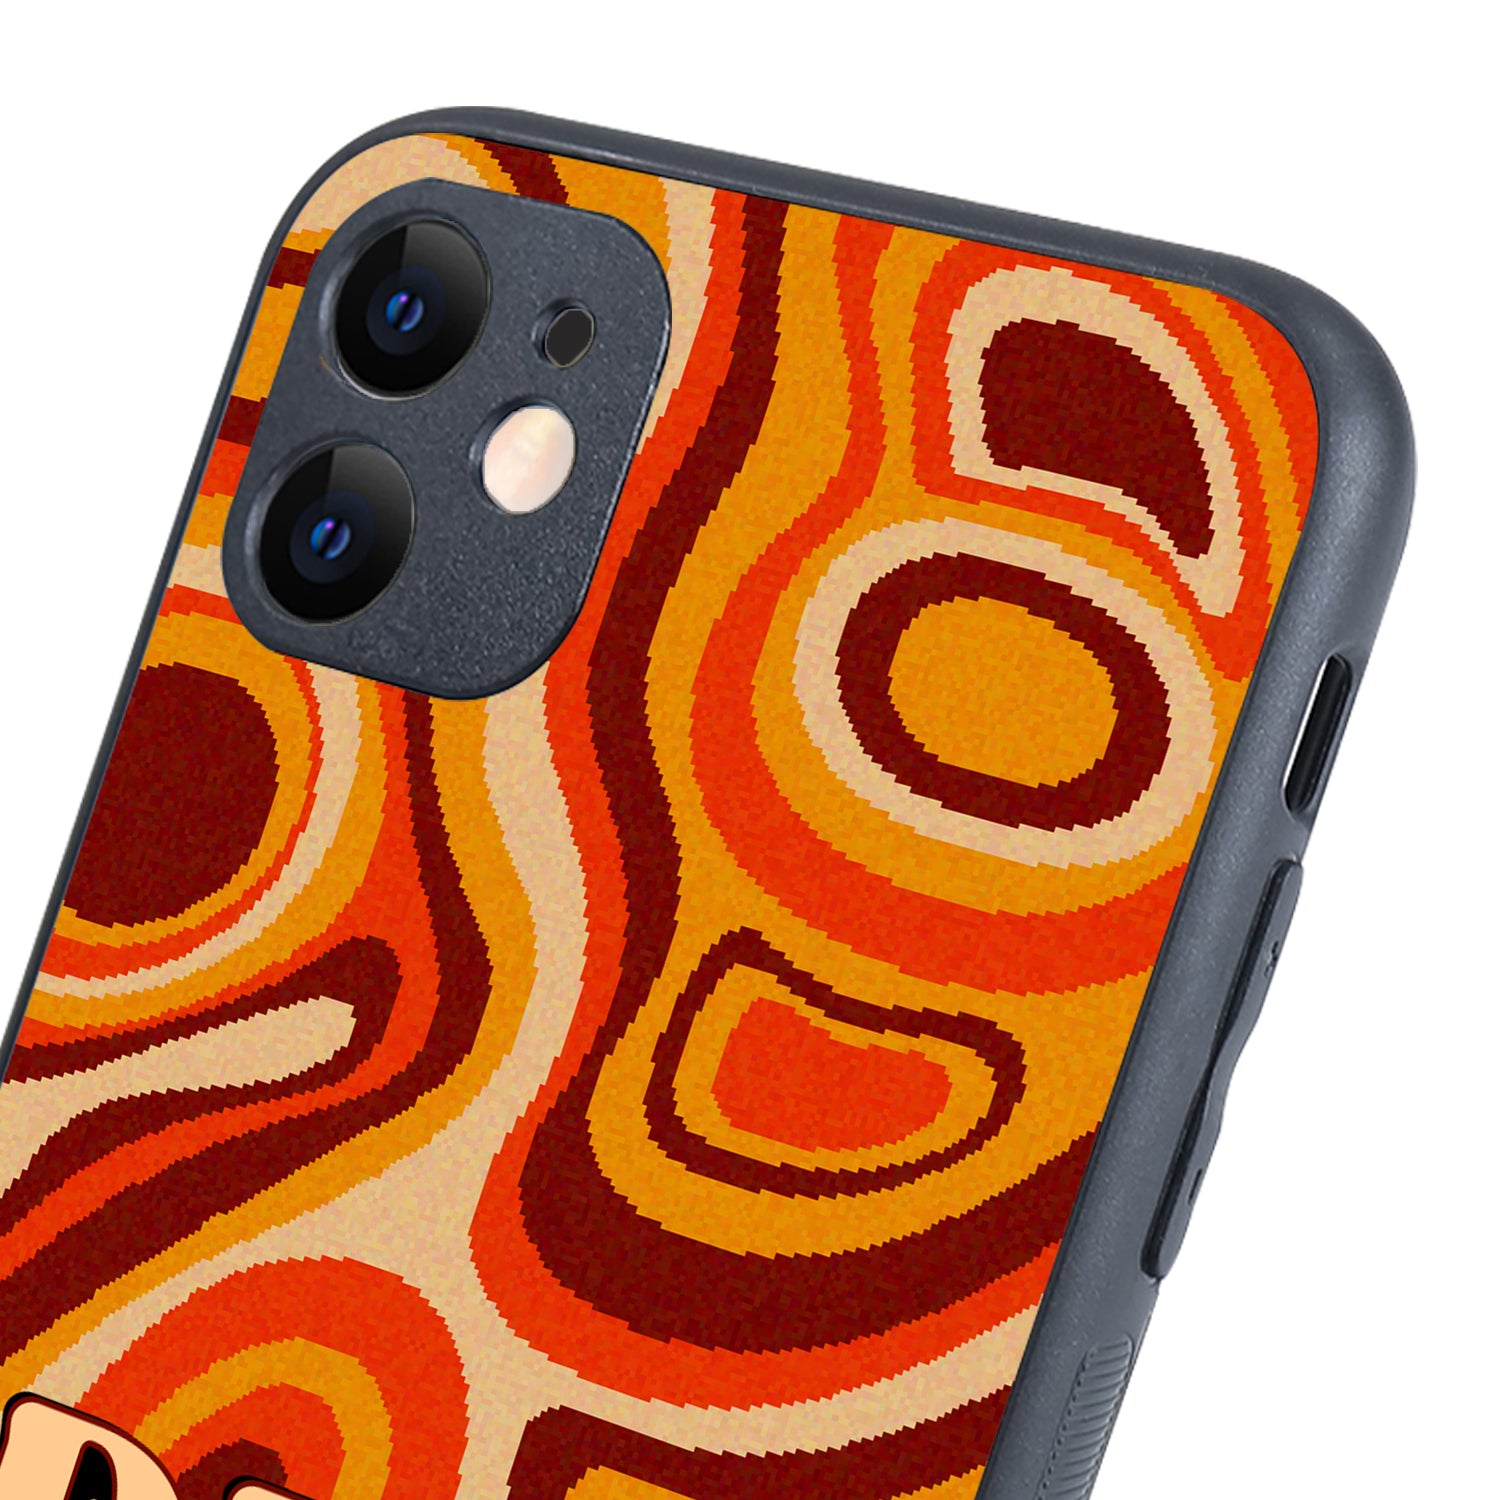 Drip Marble iPhone 11 Case